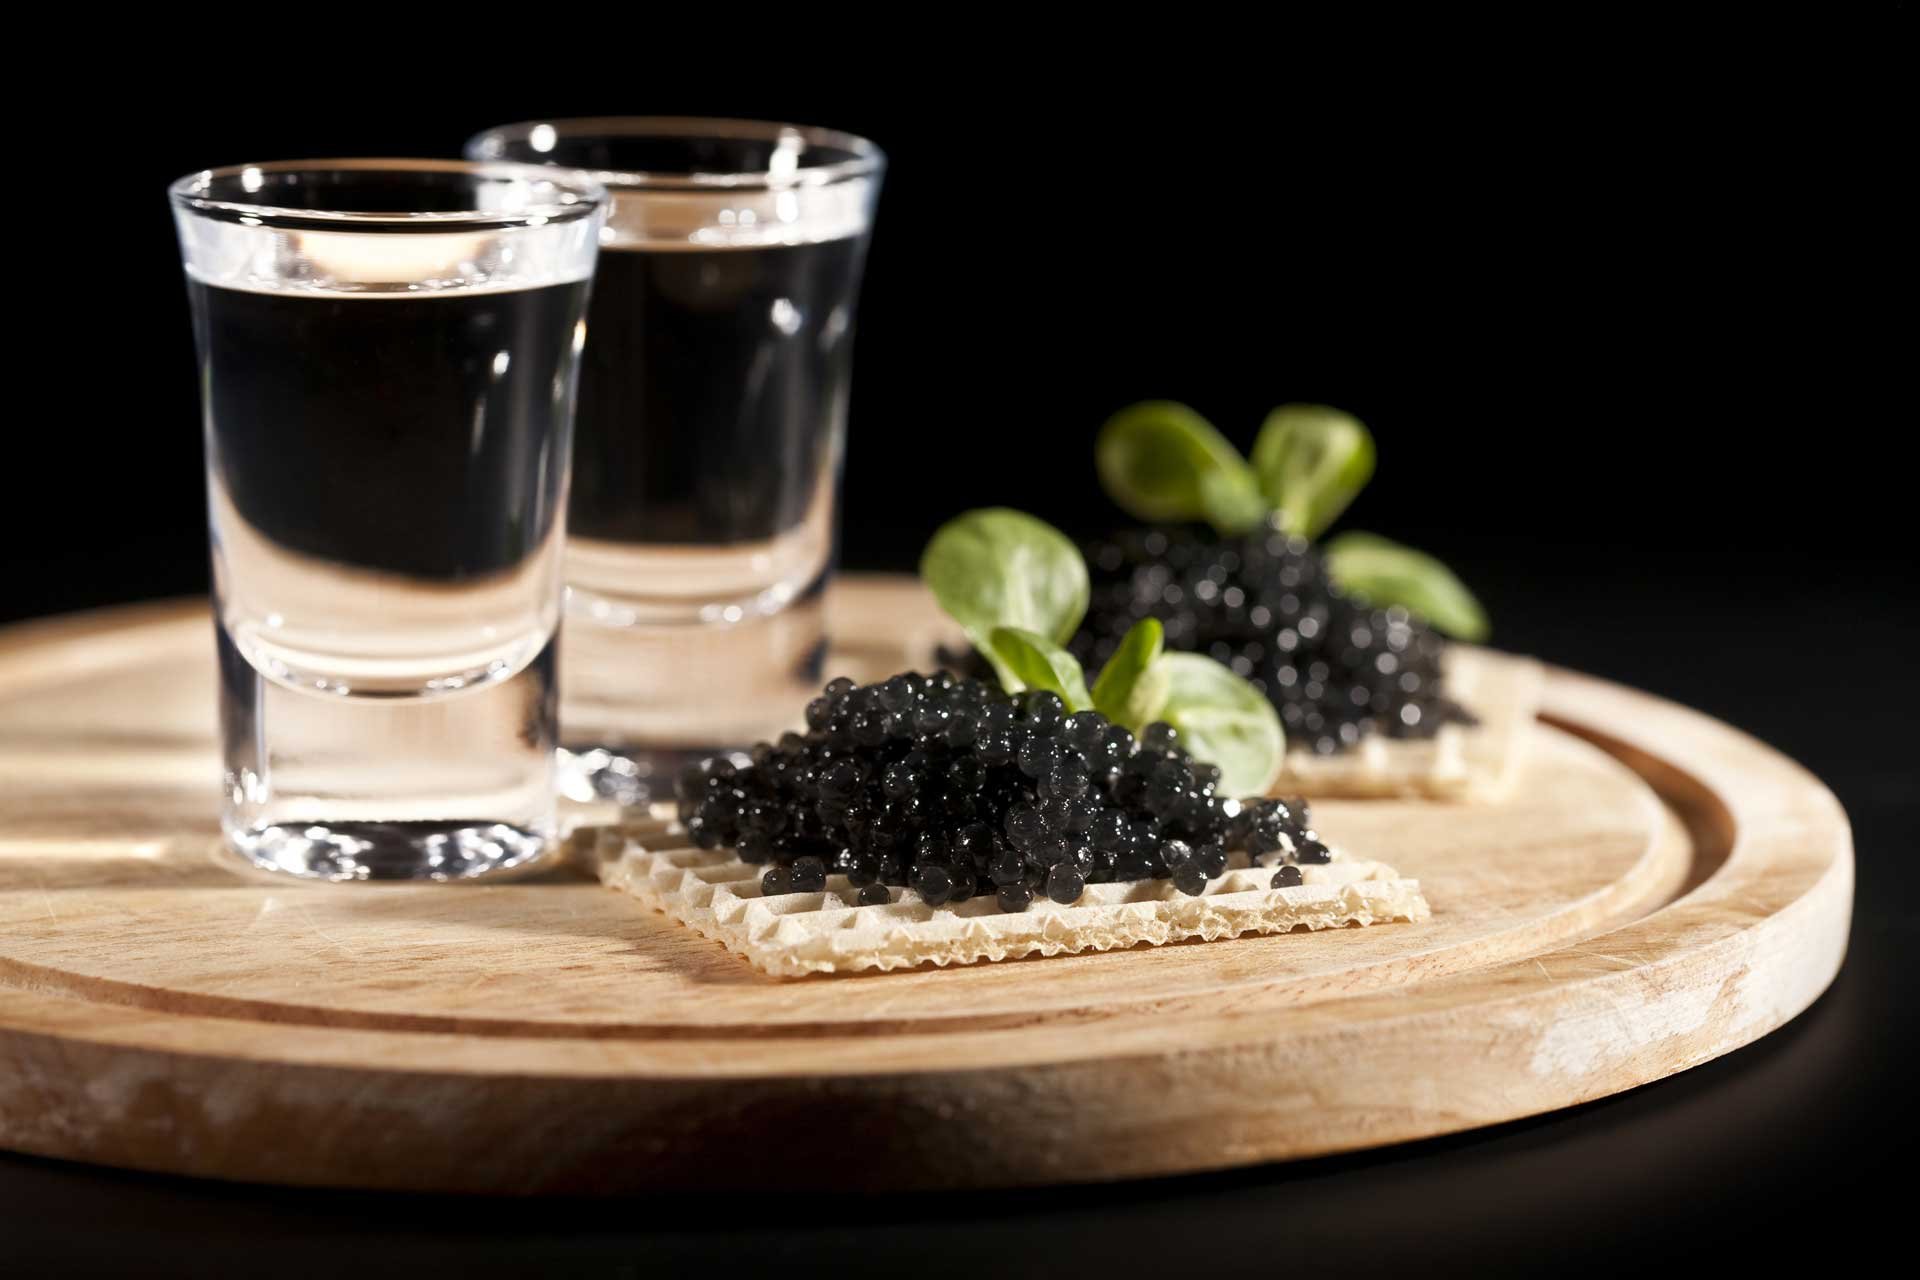 Vodka in two shot glasses behind a cracker with black caviar on it, displayed on a wooden board